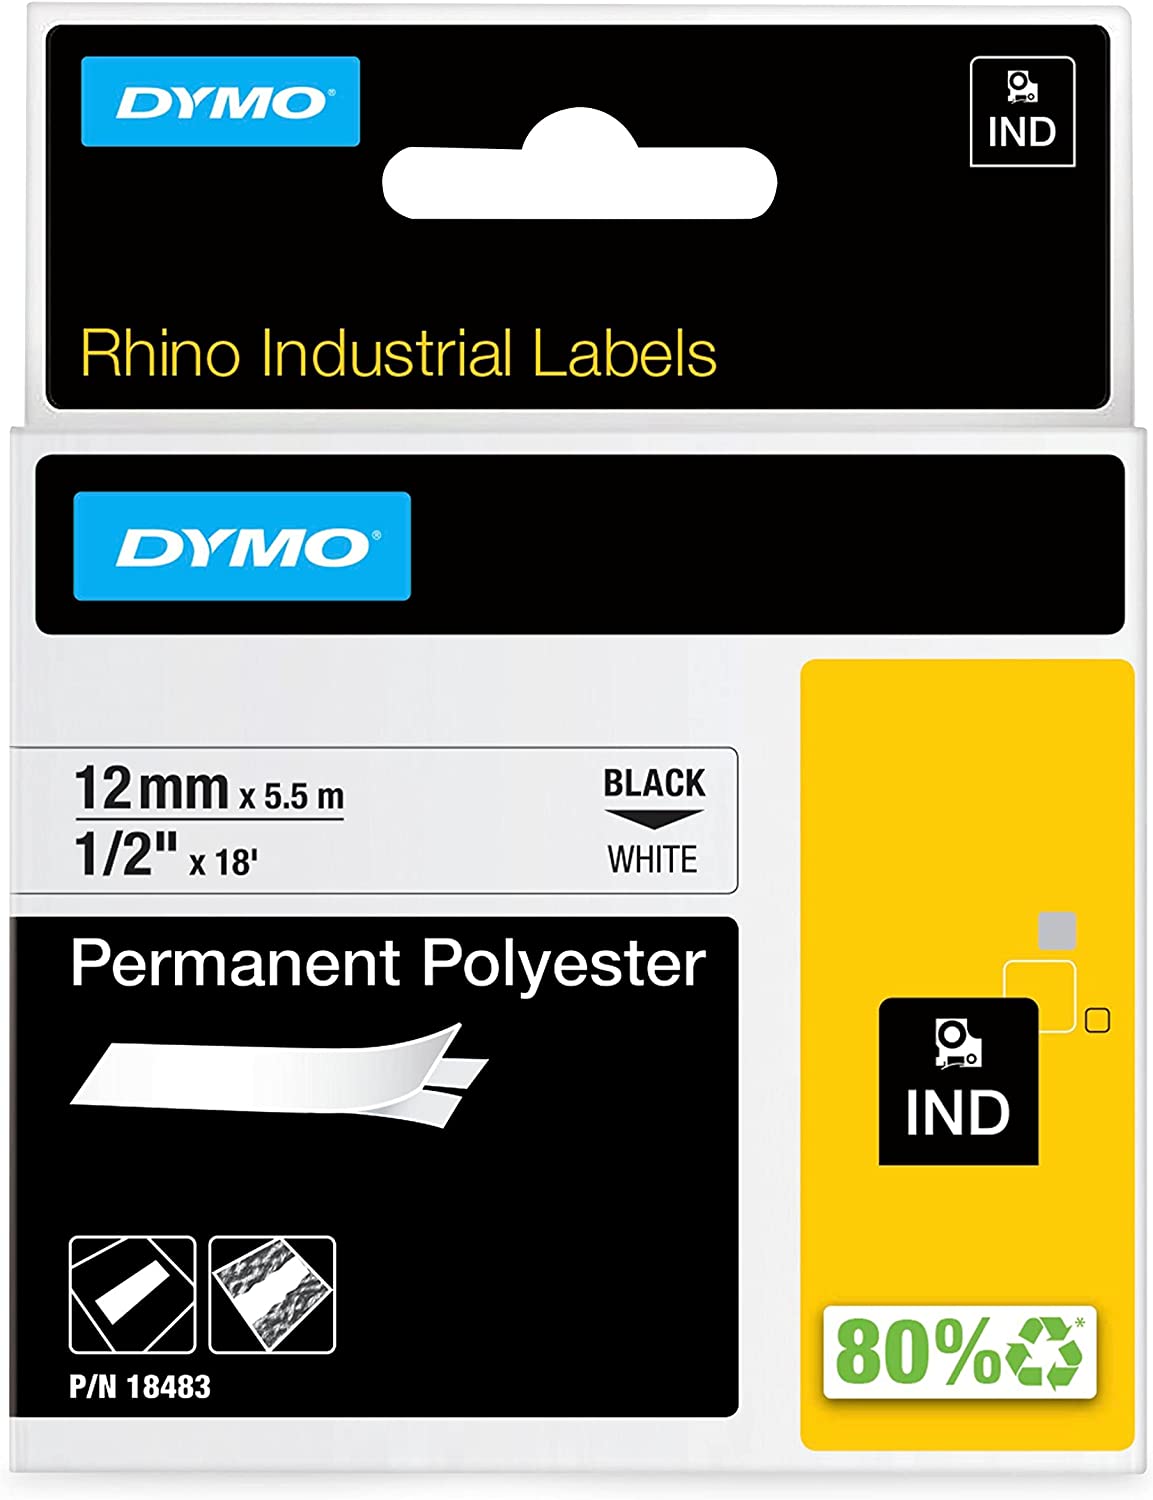 DYMO Authentic Industrial Permanent Labels for LabelWriter and Industrial Label Makers, Black on White, 1/2", 1 Roll (18483), DYMO Authentic 1/2" (12MM)